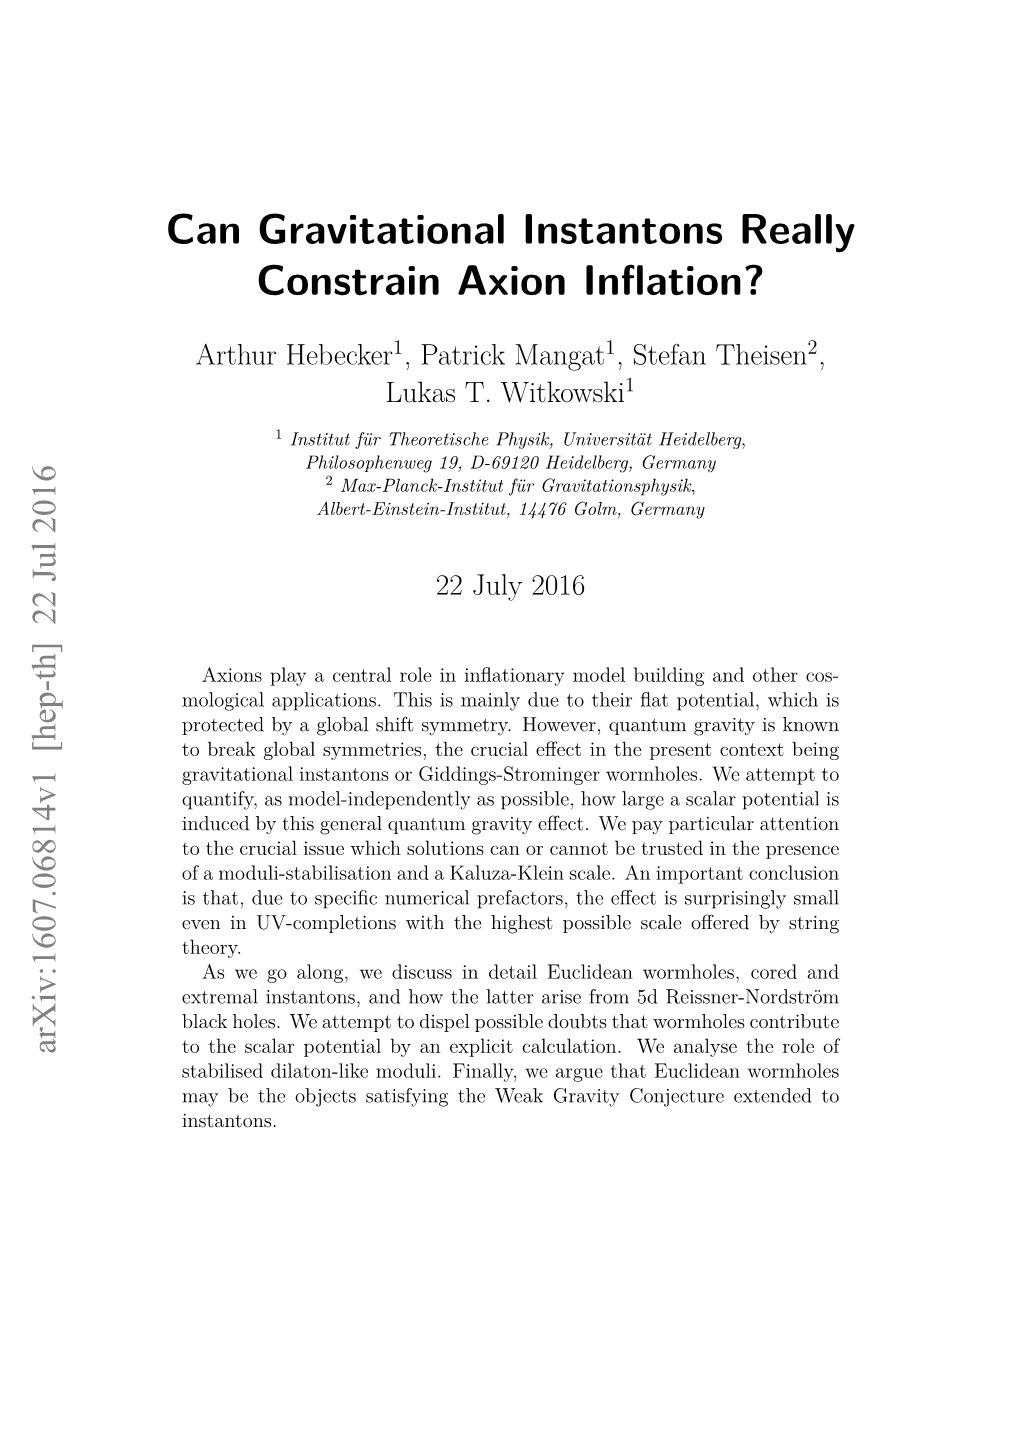 Can Gravitational Instantons Really Constrain Axion Inflation?